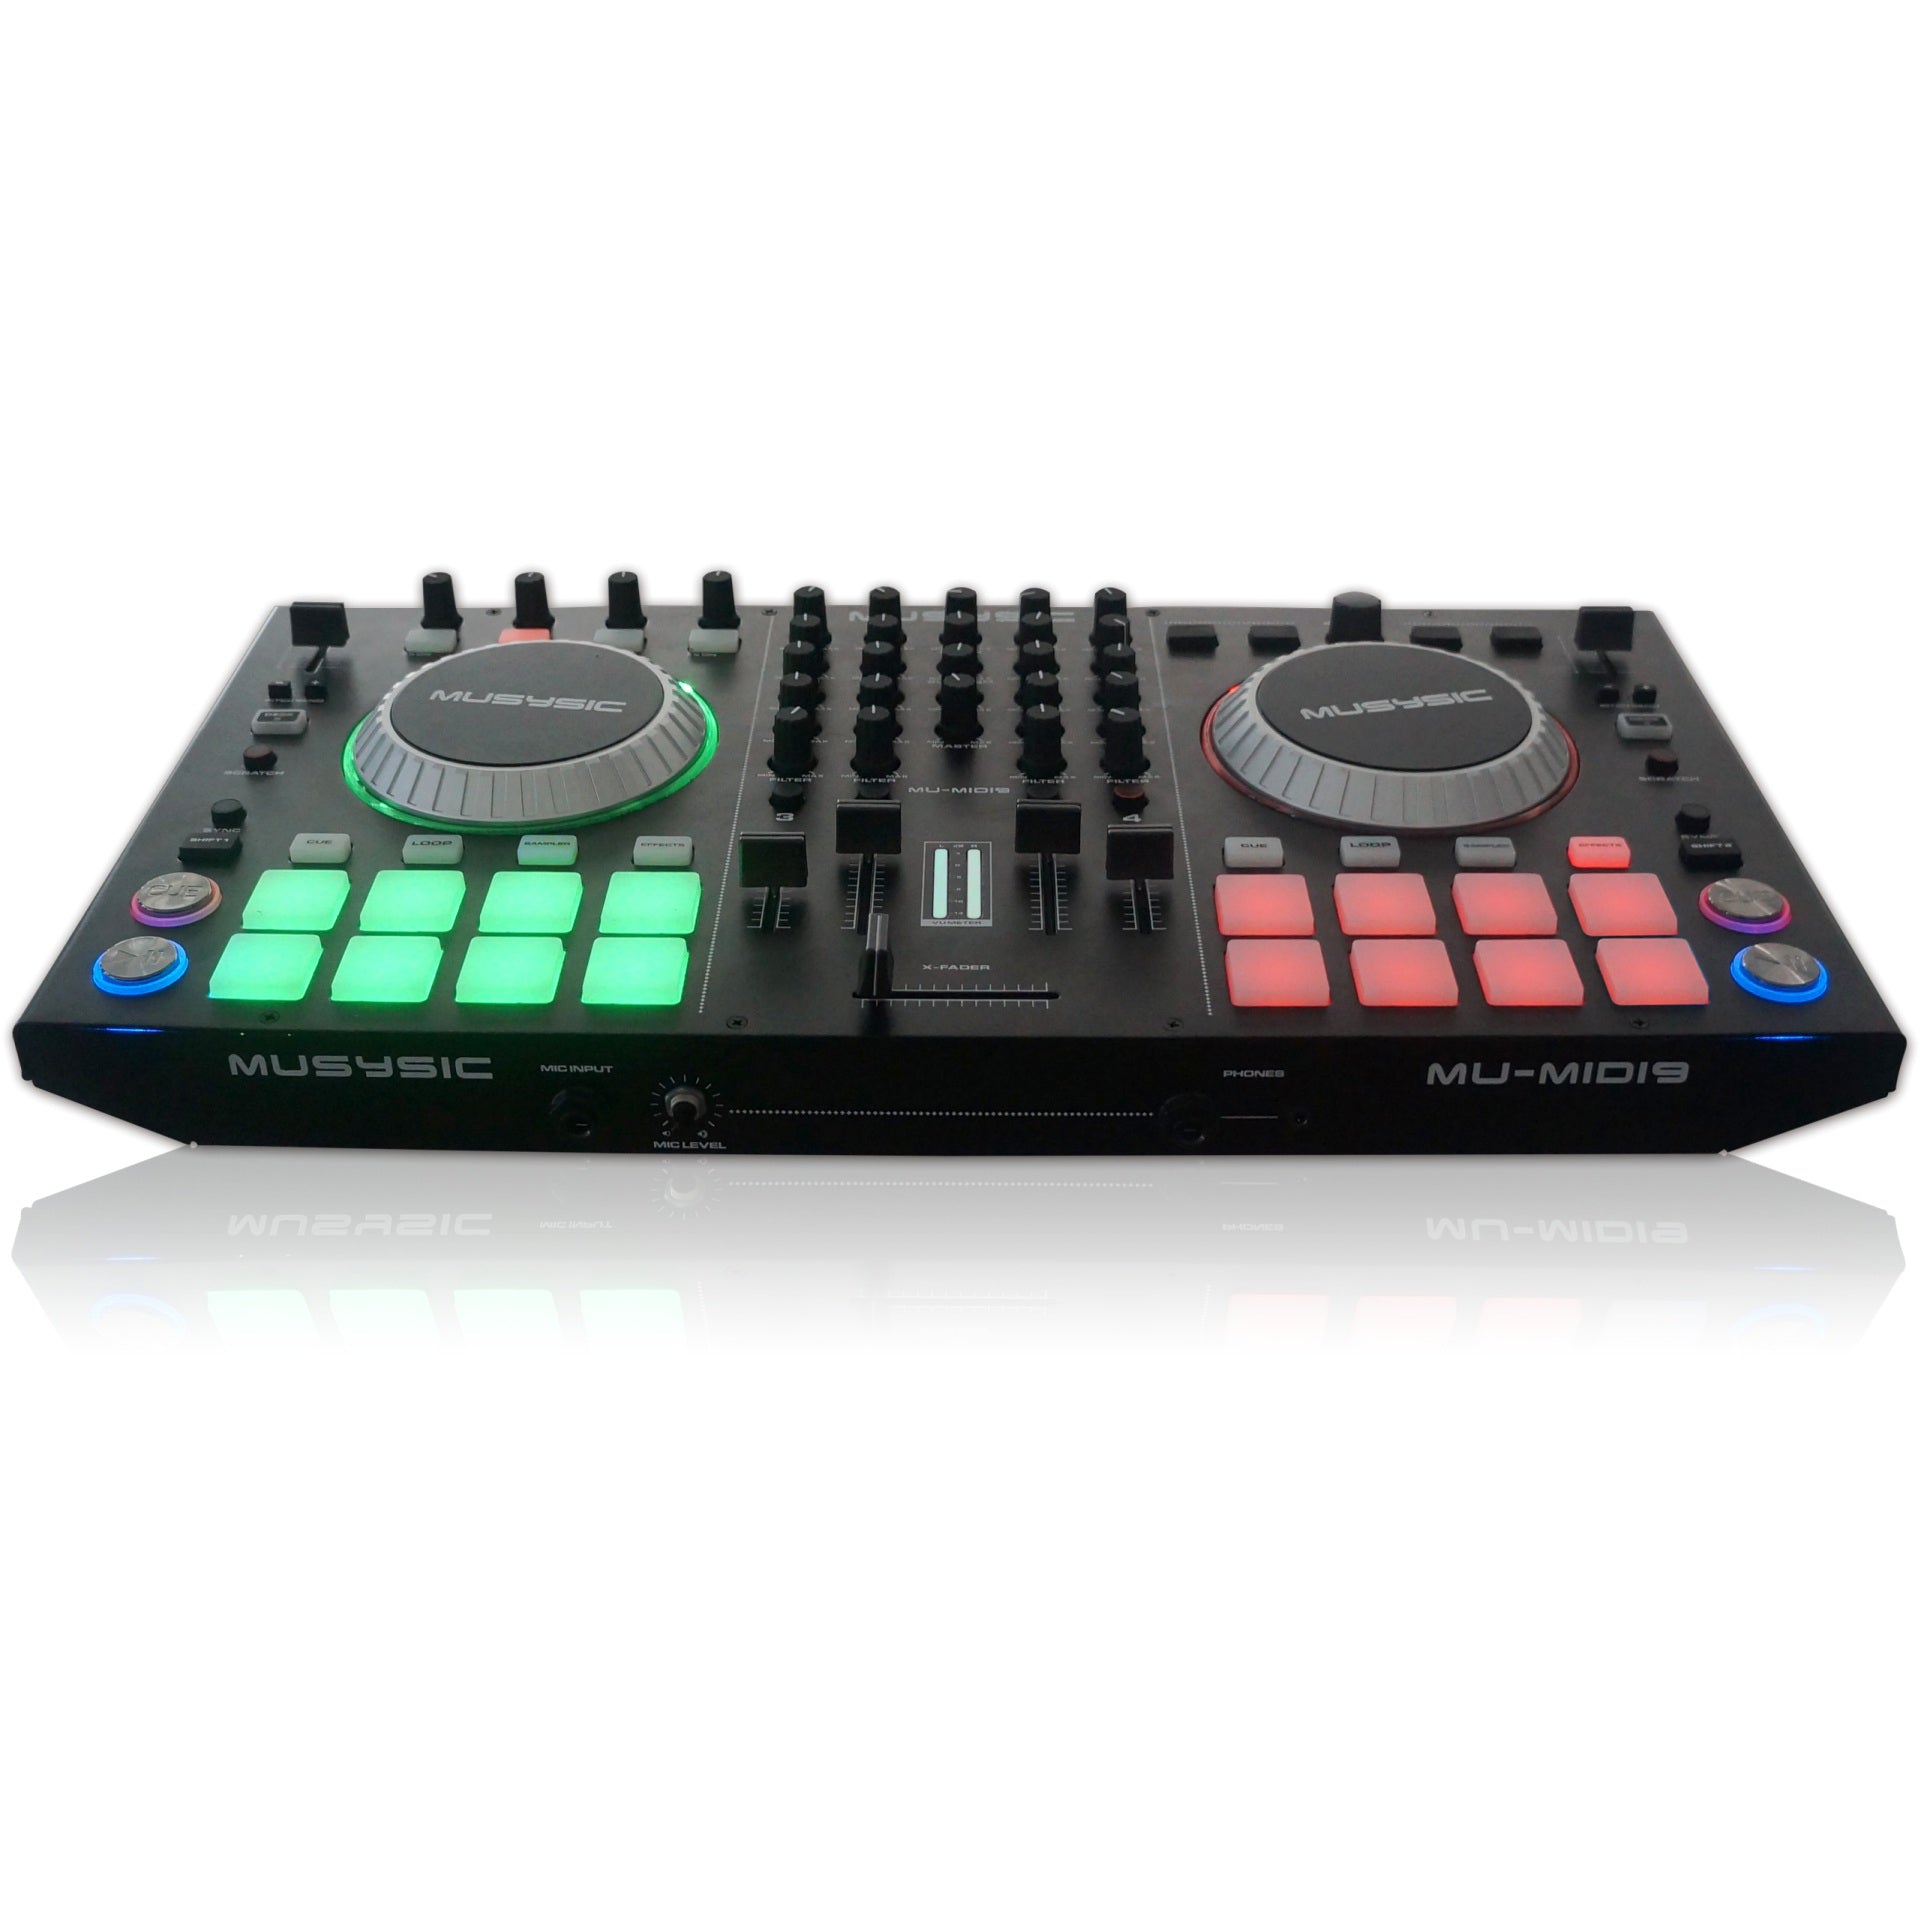 4-Channel USB MIDI with 8 Soft-Touch Rubber Pads